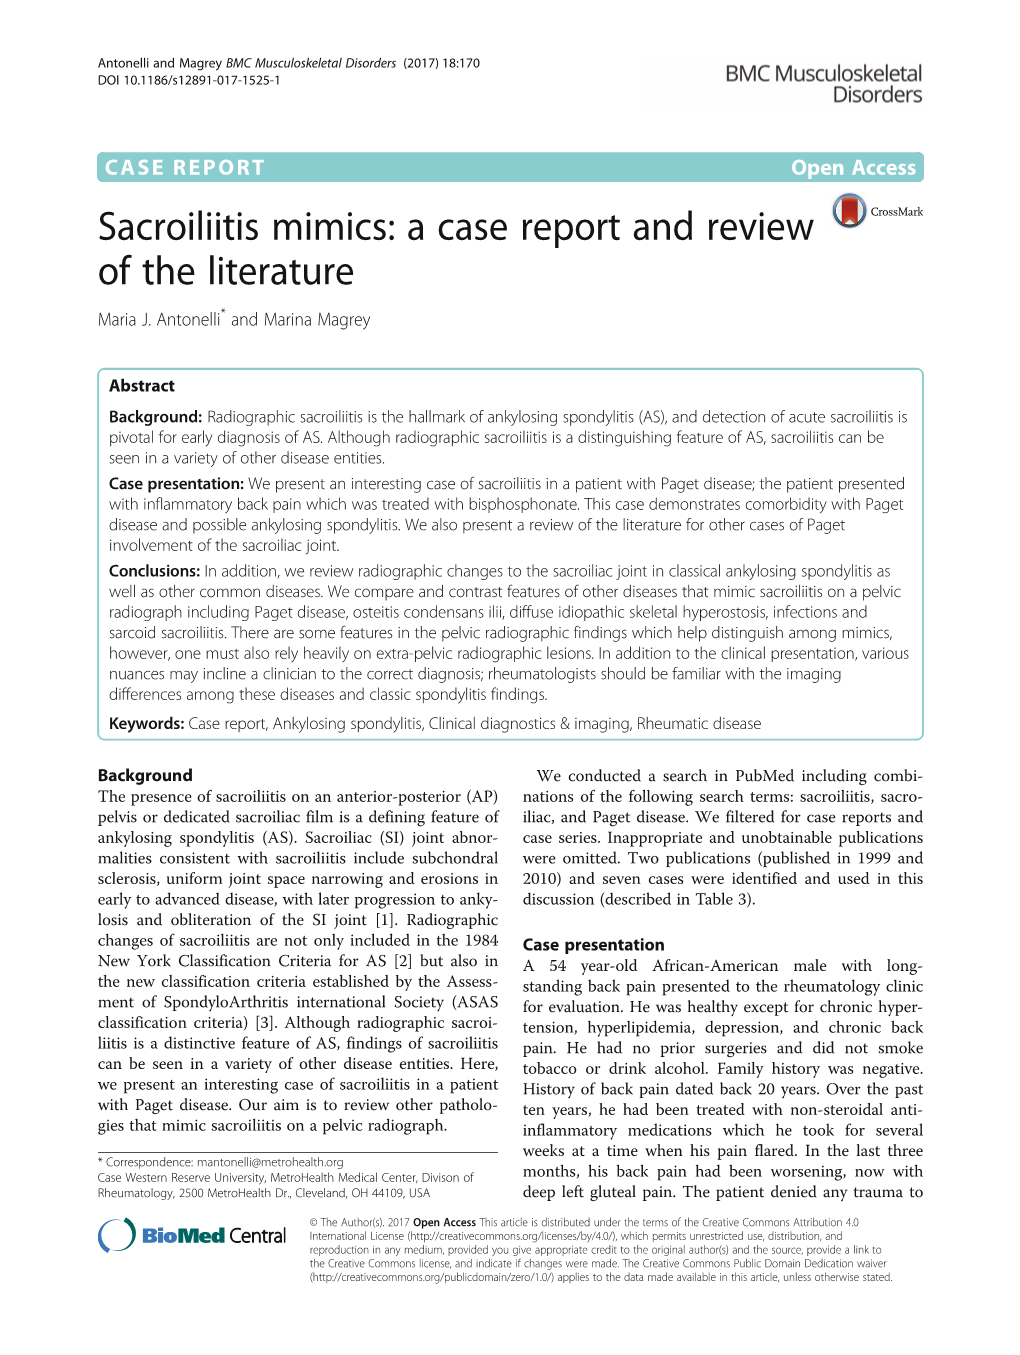 Sacroiliitis Mimics: a Case Report and Review of the Literature Maria J